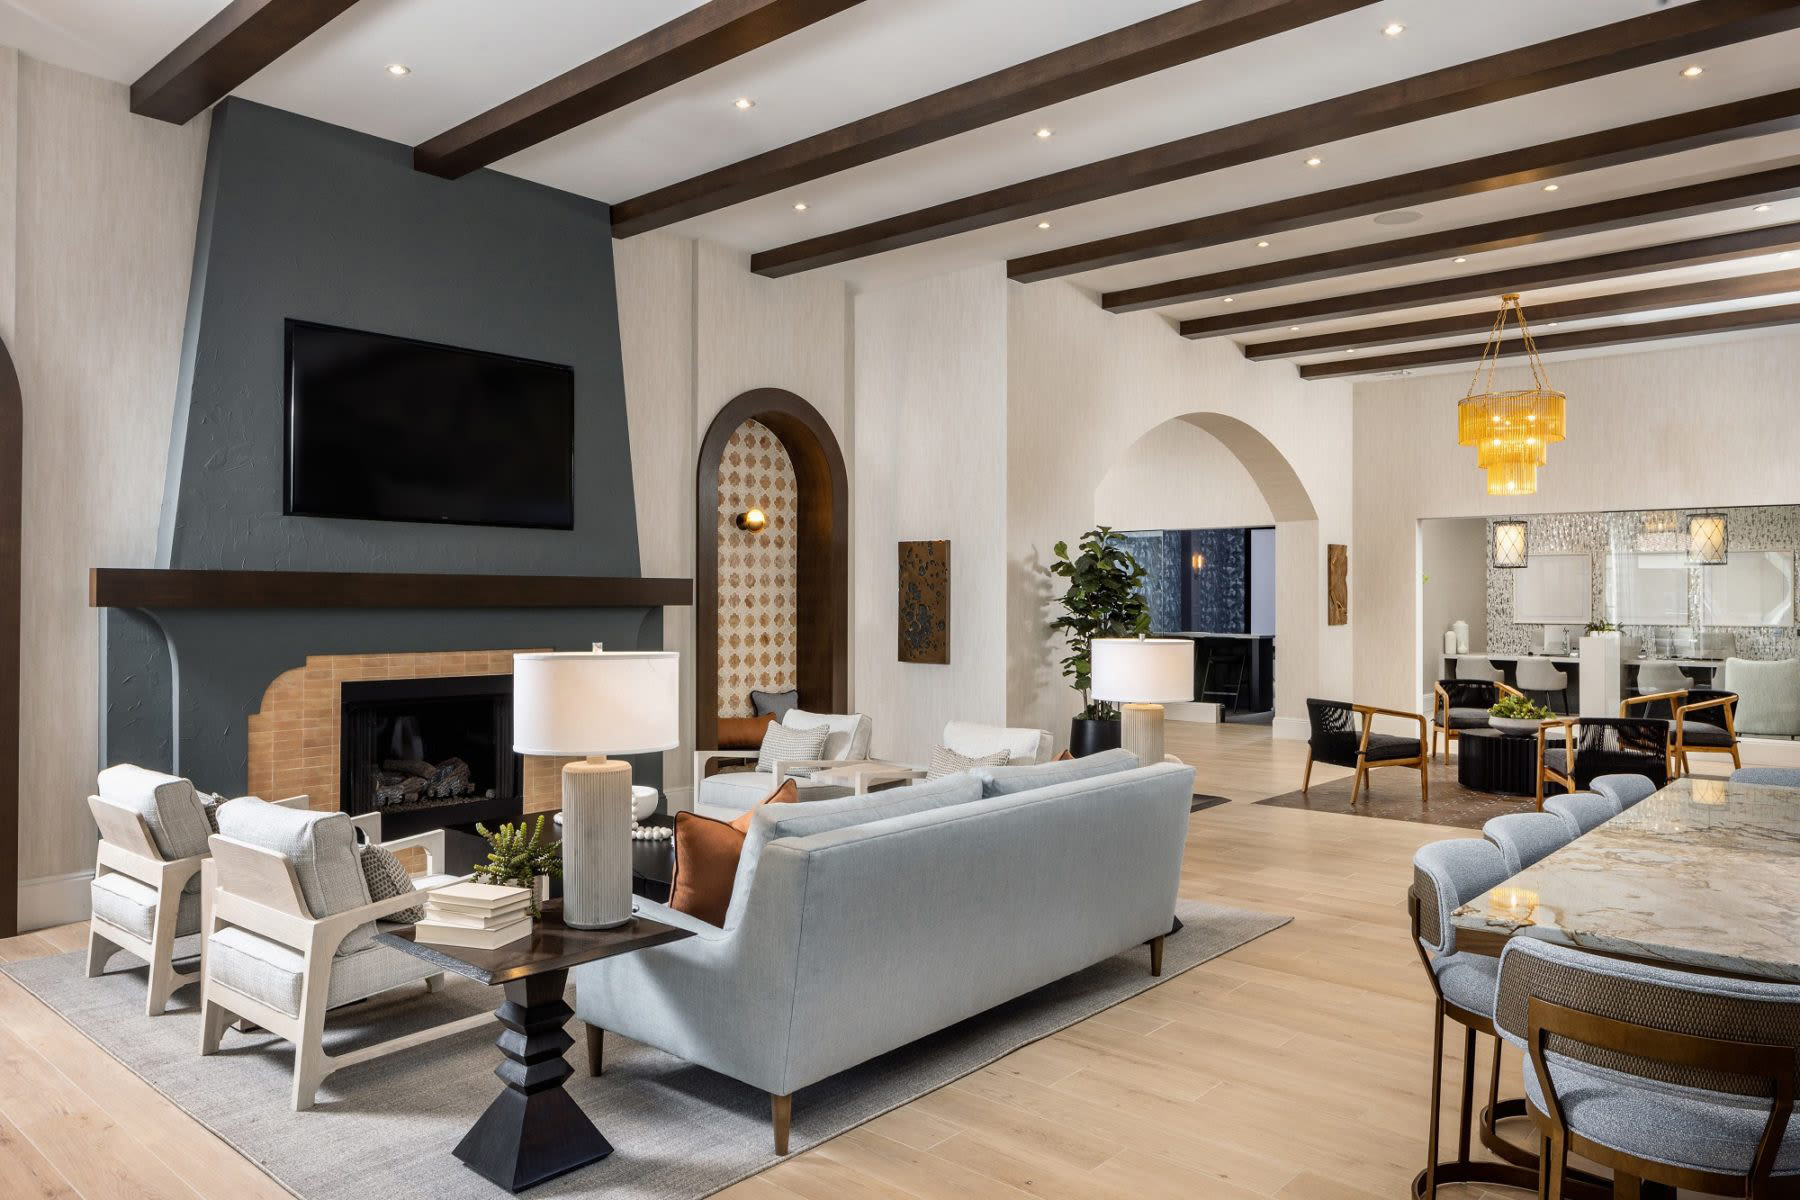 Relax and socialize in a furnished clubhouse designed with natural light, modern furnishings, and sleek wood-style flooring at Locklyn West Palm in West Palm Beach, Florida